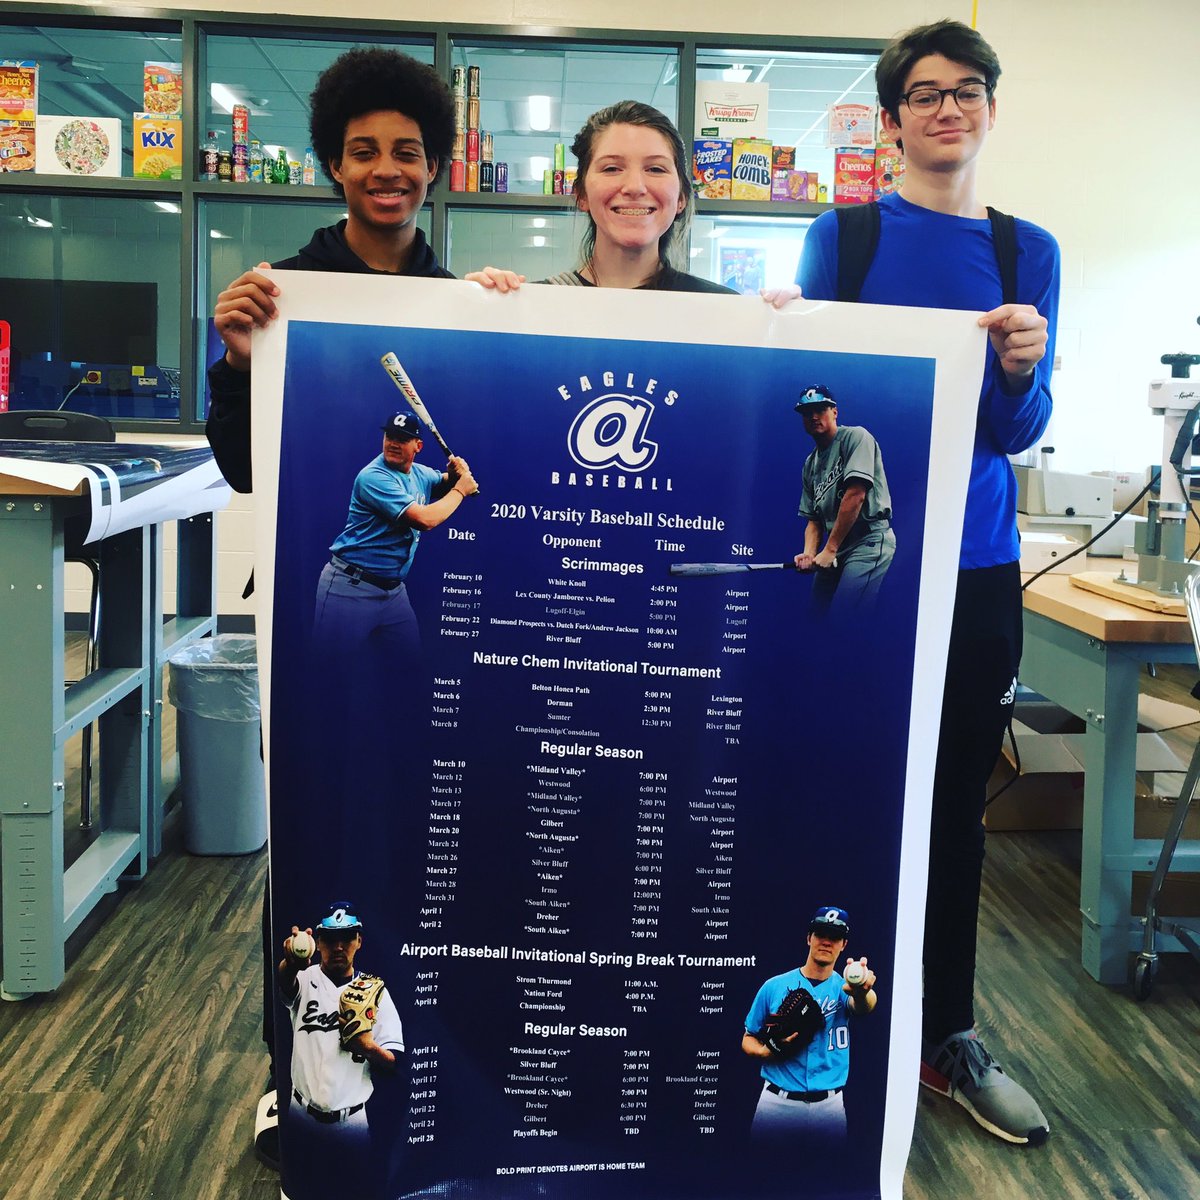 These 3 worked as a team to get these schedule banners designed for @Airport_Eagles Baseball. Talk about team work on and off the field! Have a great season boys!!